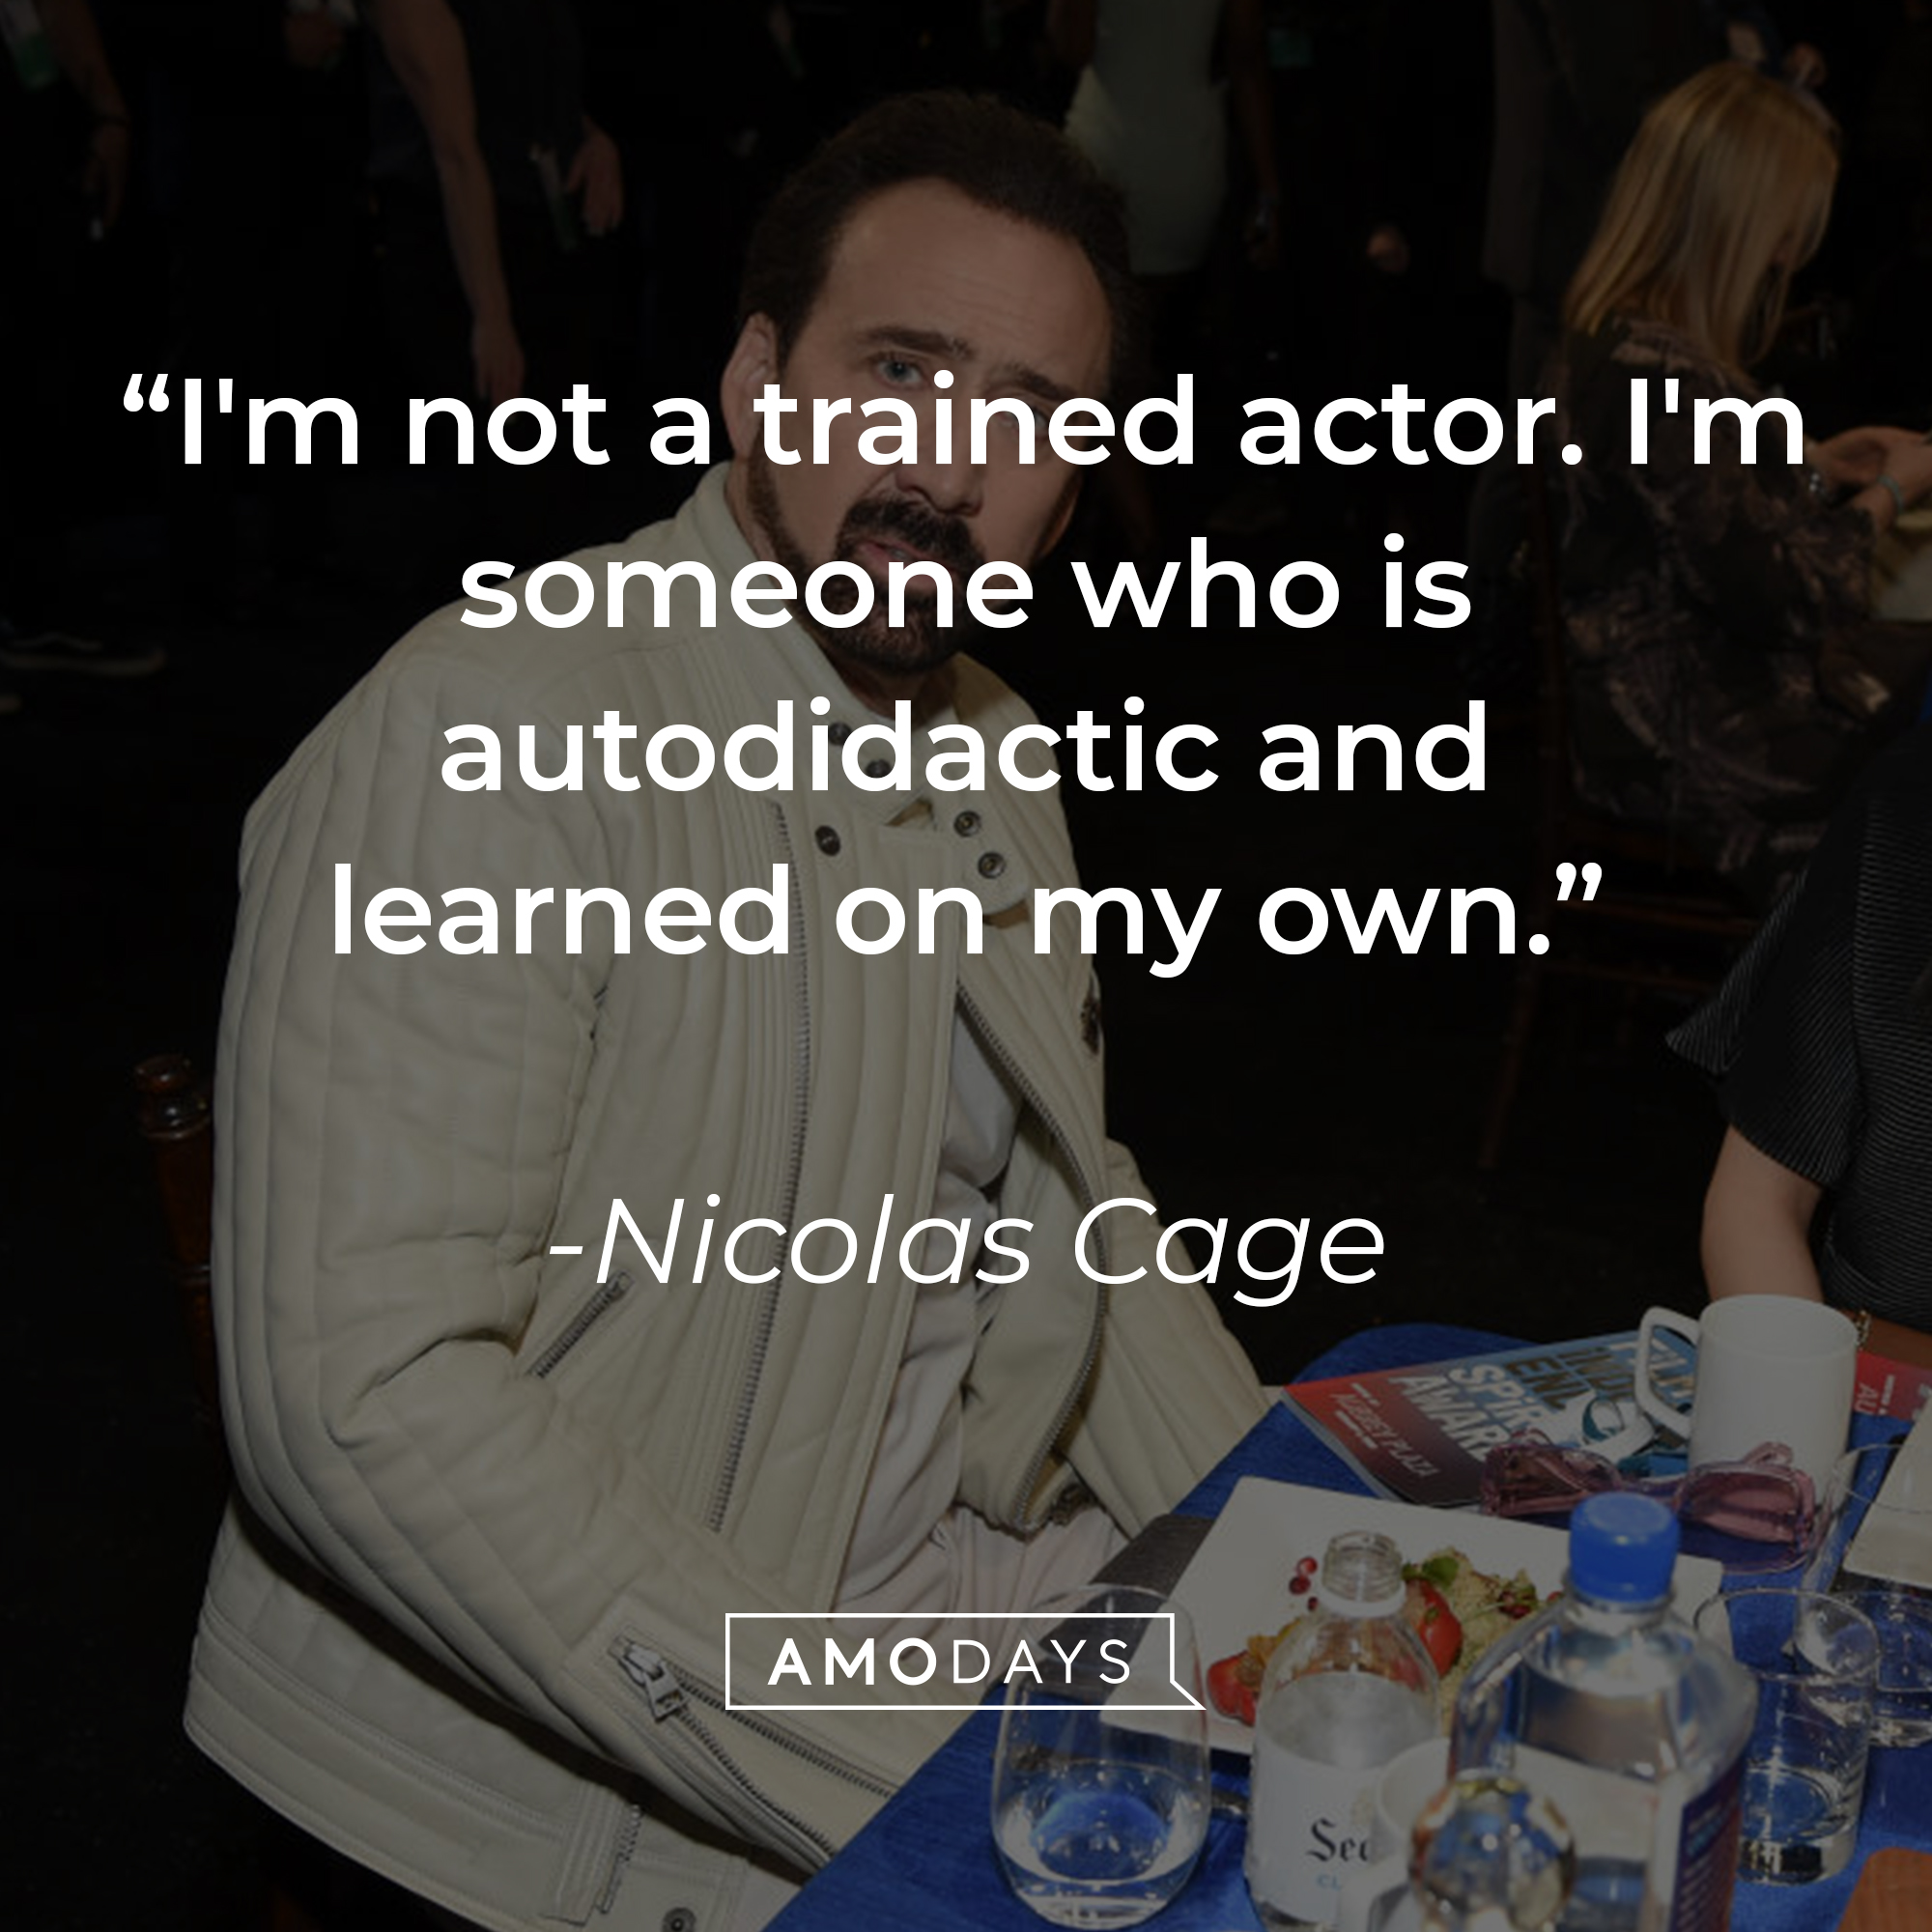 Nicolas Cage's quote: "I'm not a trained actor. I'm someone who is autodidactic and learned on my own." | Source: Getty Images